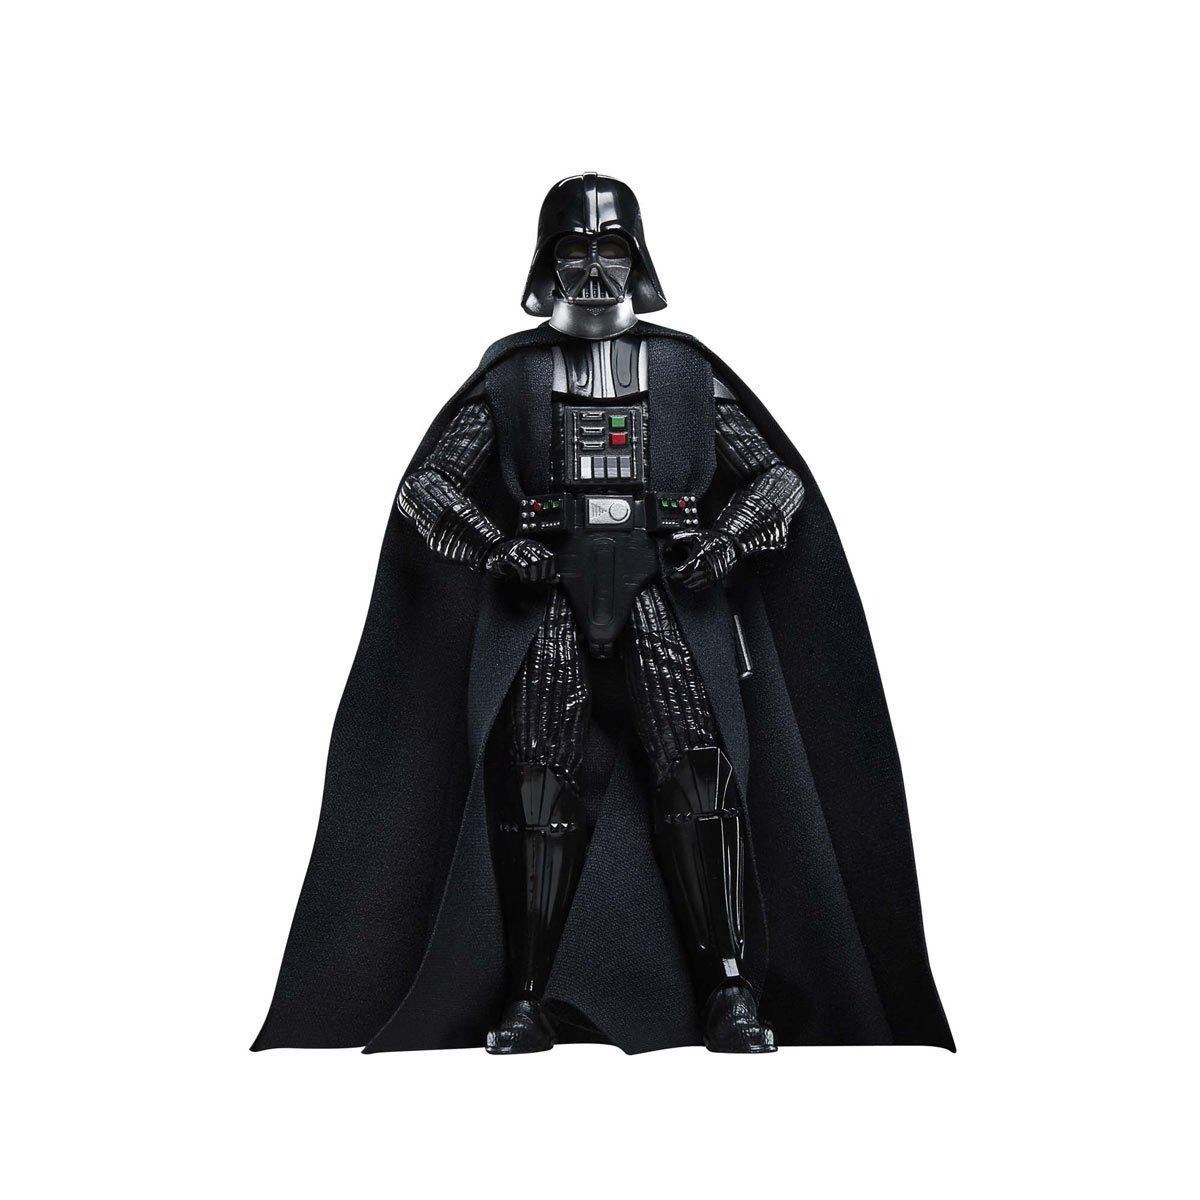 Star Wars TBS a New Hope Darth Vader 6-Inch Action Figure画像